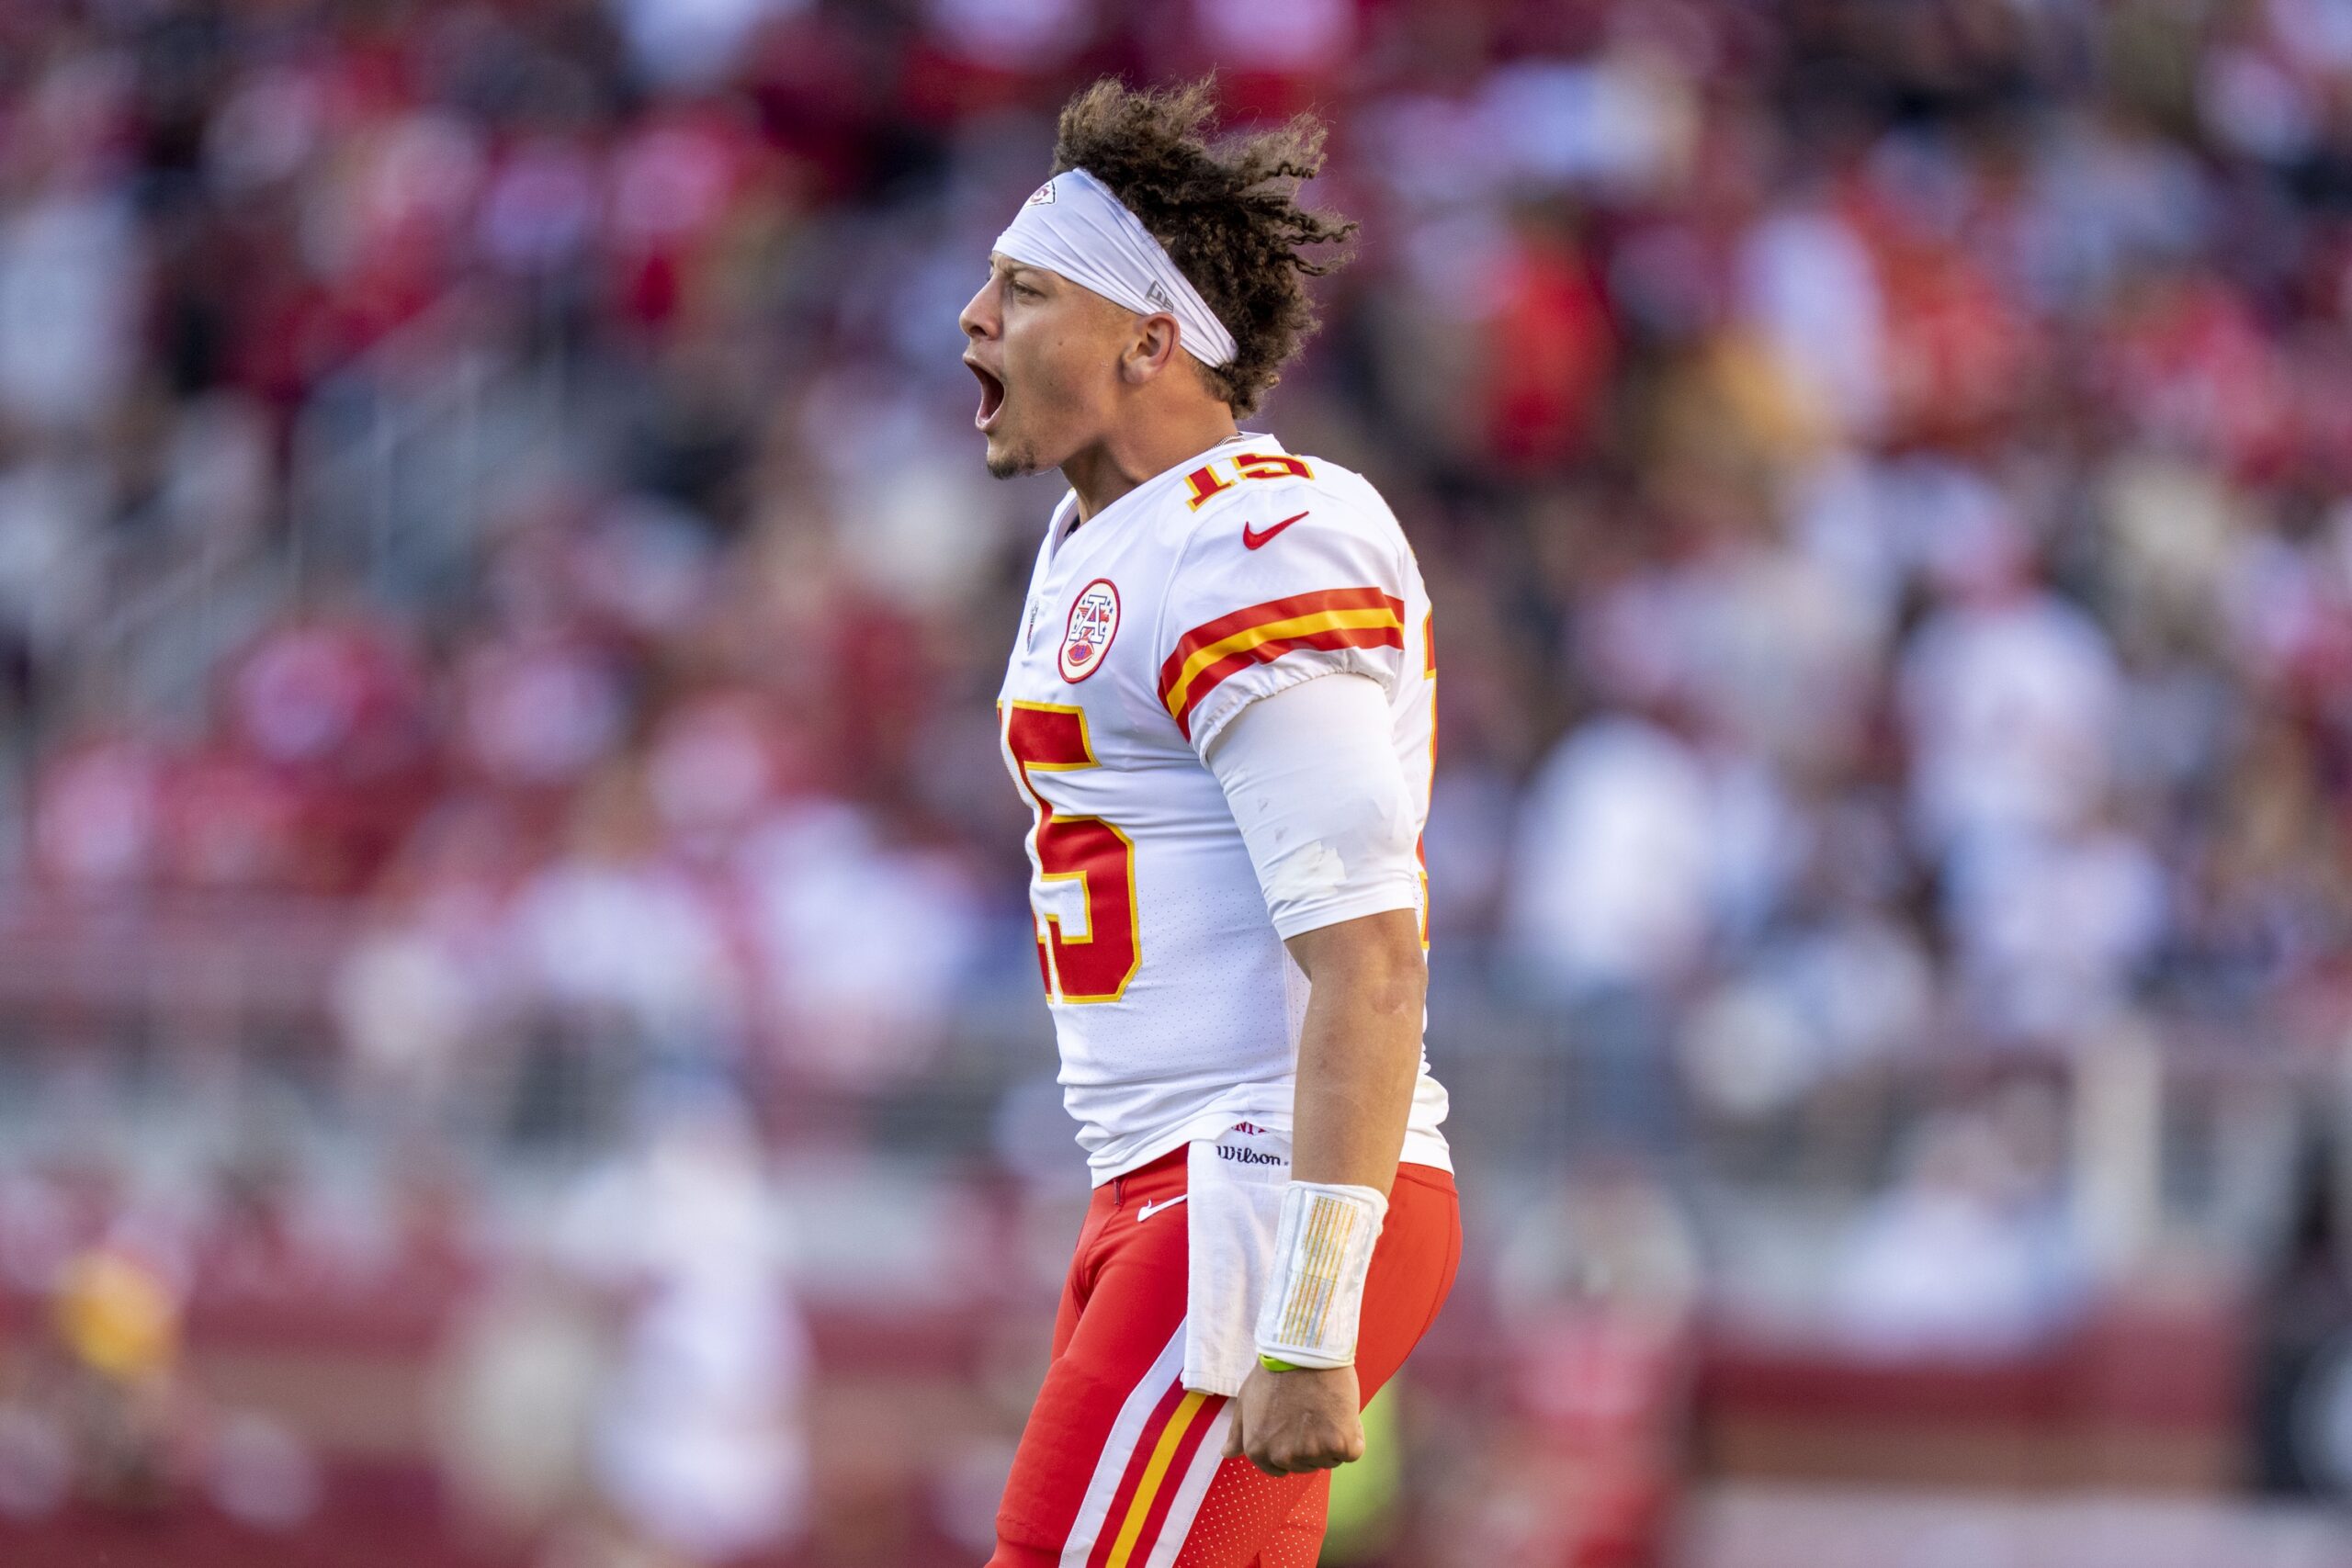 Patrick Mahomes (15) celebrates after a point-after-touchdown against the San Francisco 49ers during the fourth quarter at Levi's Stadium.